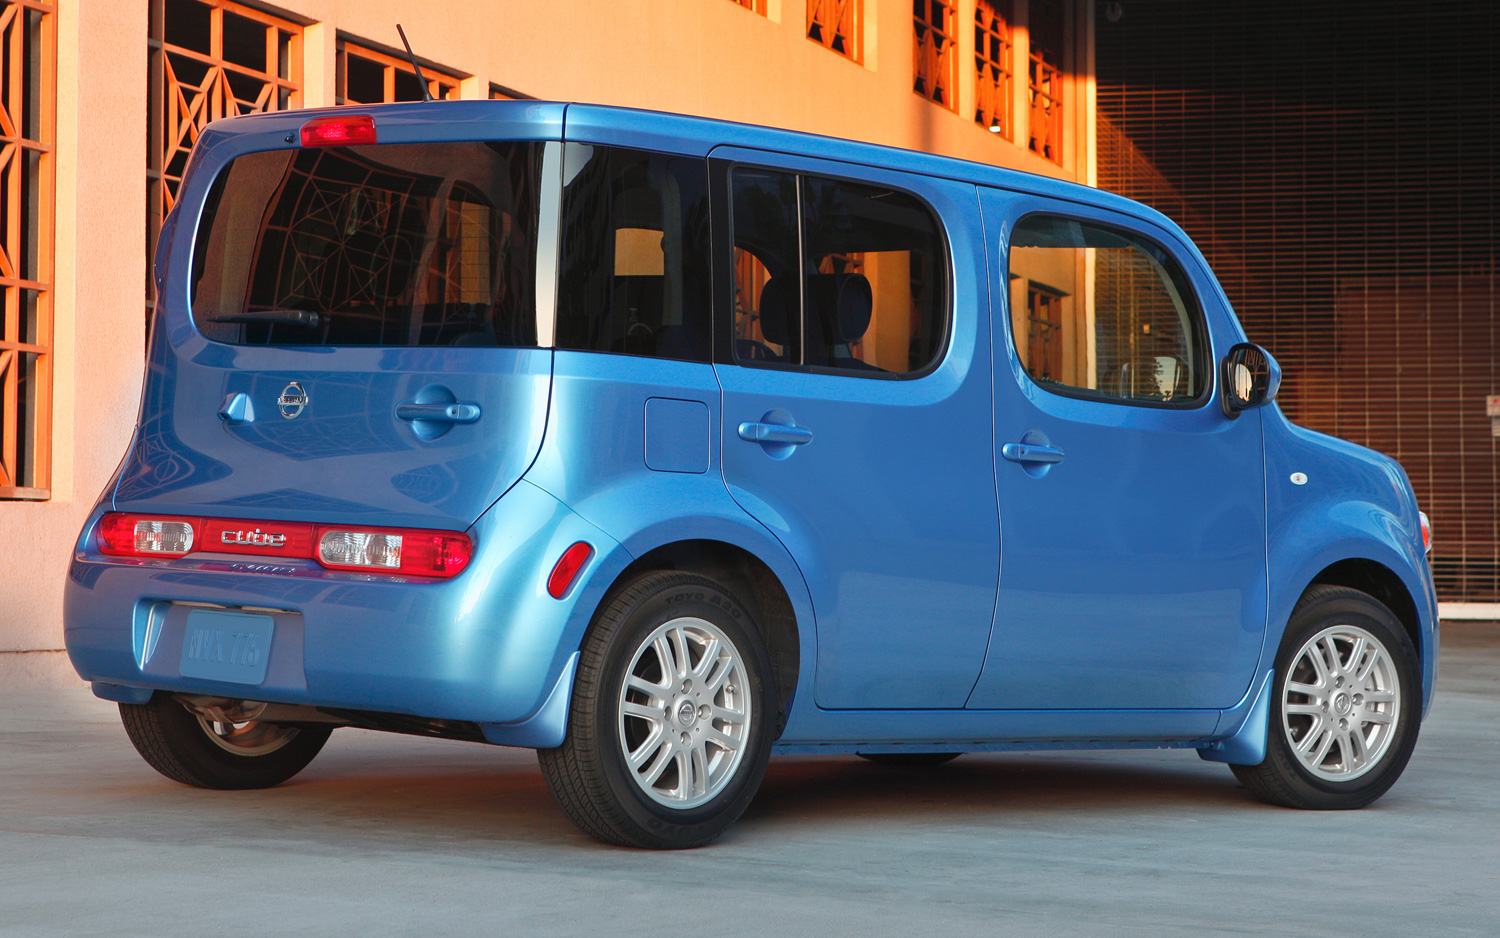 Images of Nissan Cube | 1500x938